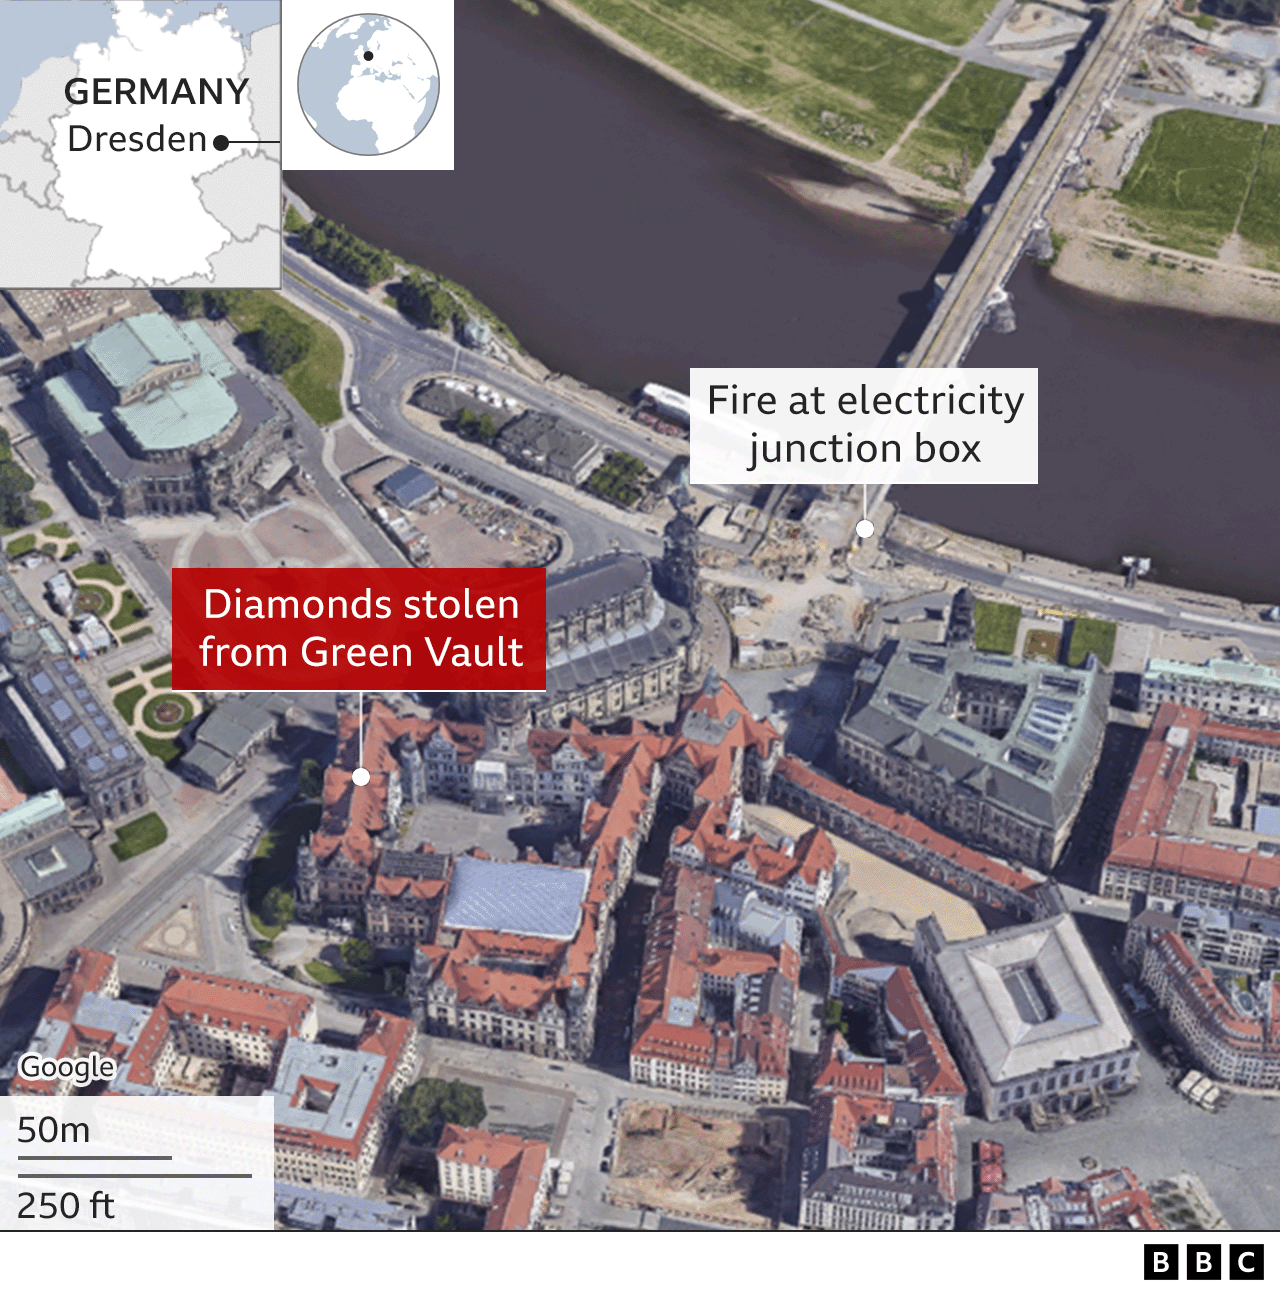 Map shows the location of the Green Vault at the Dresden museum